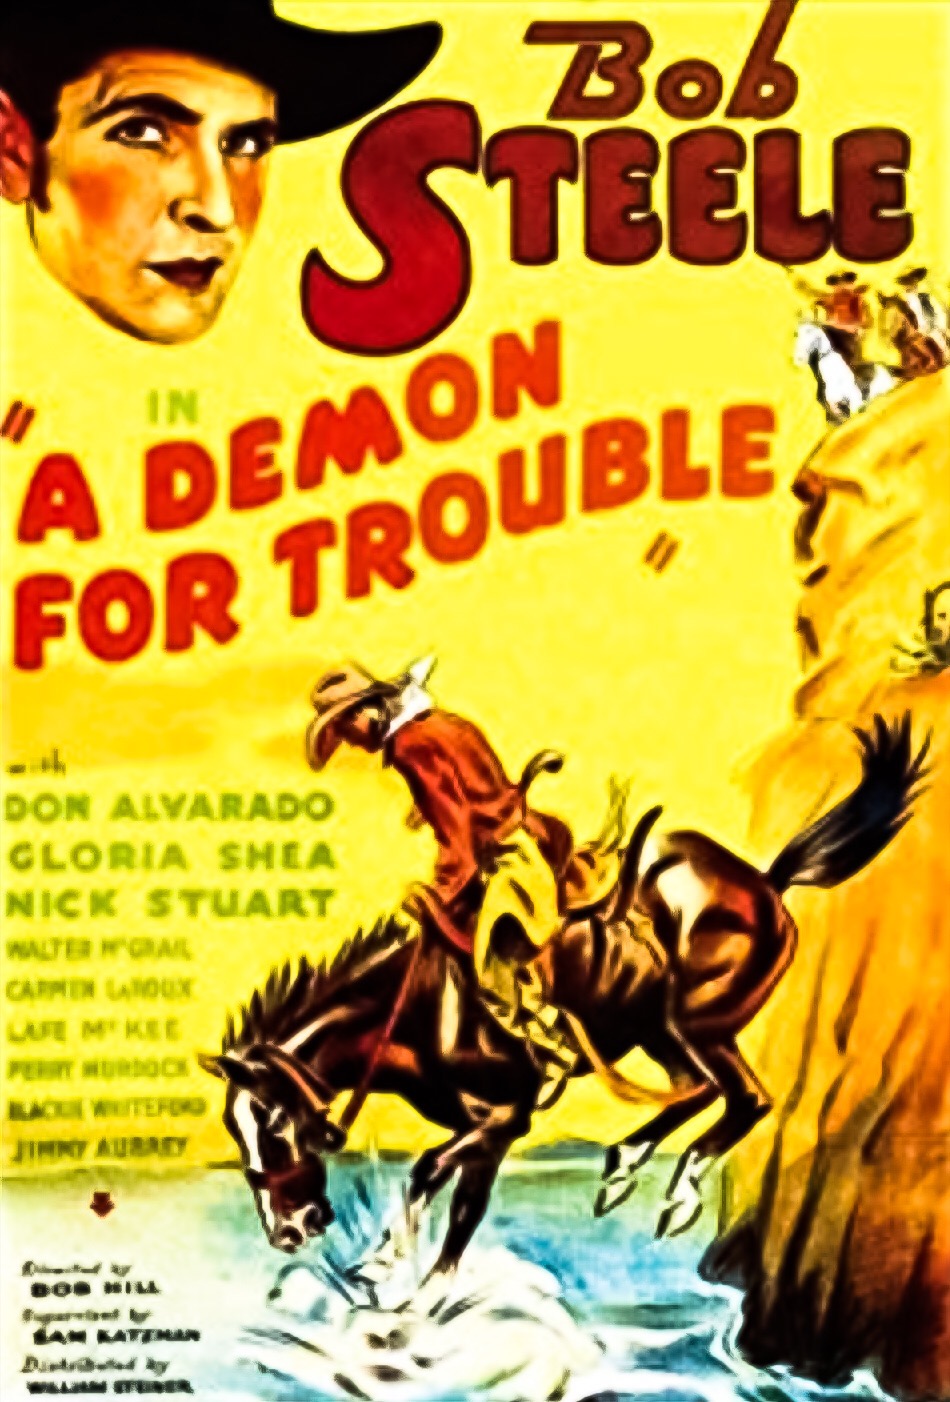 A DEMON FOR TROUBLE (1934)